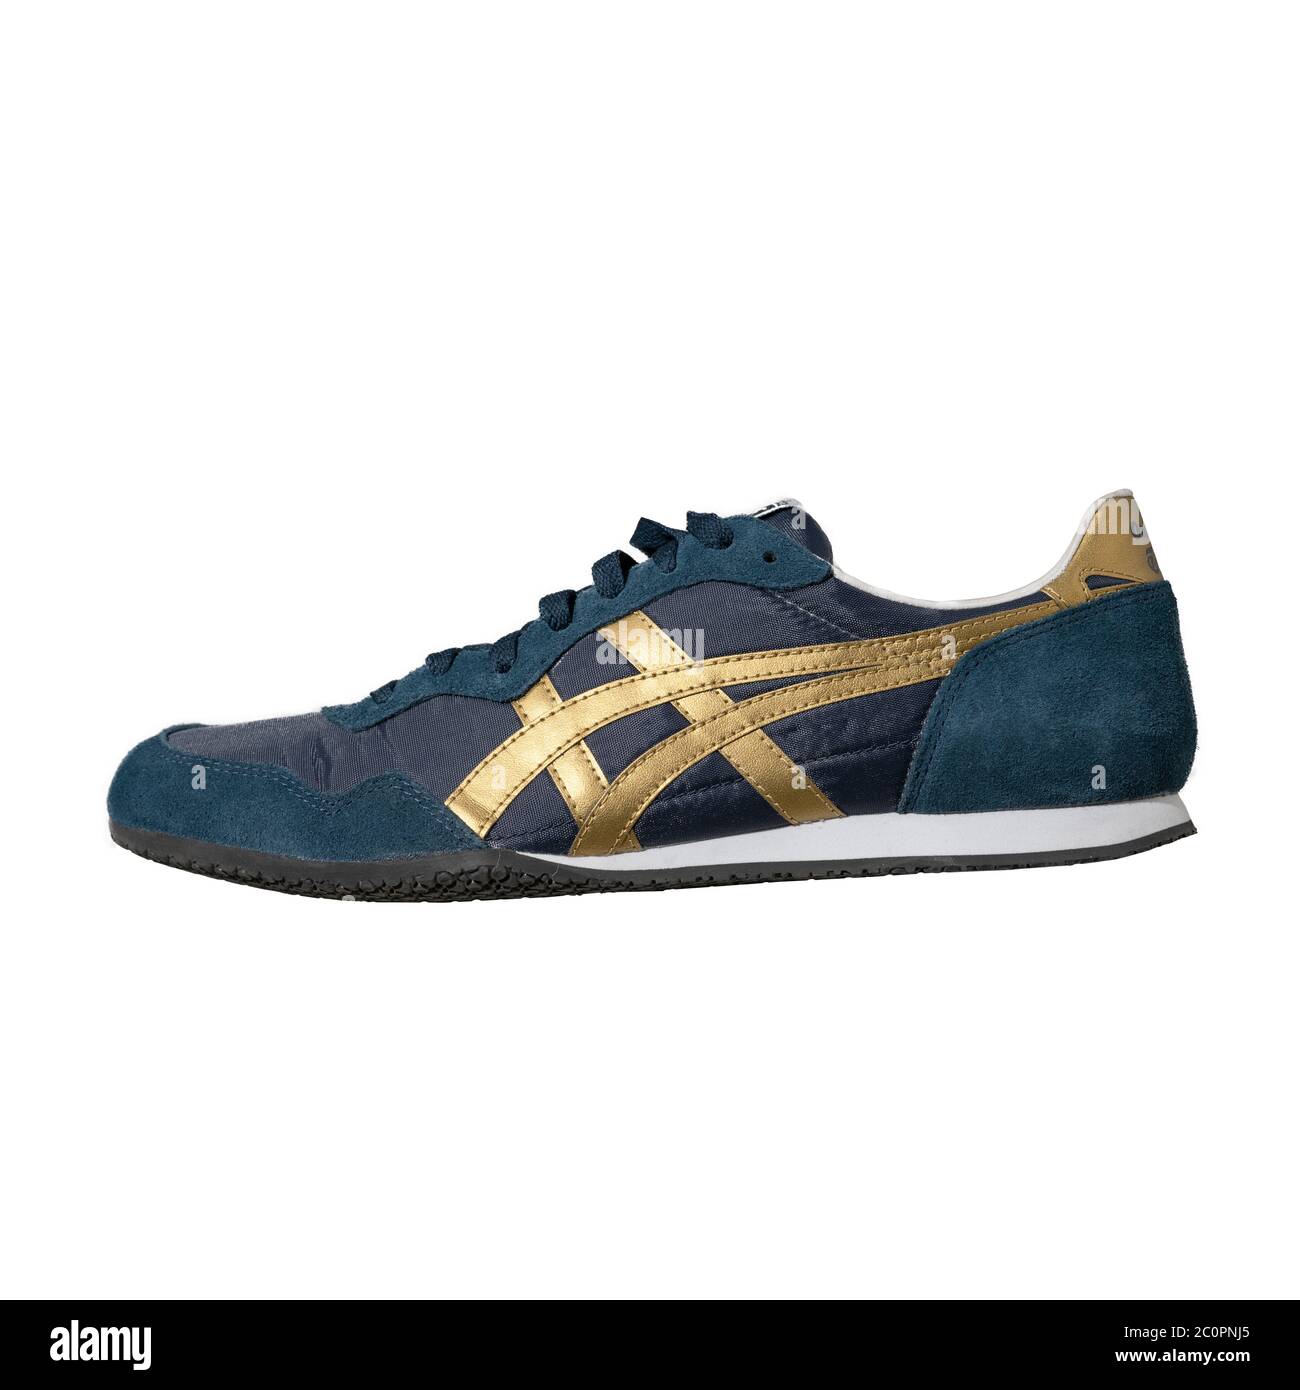 Blue Asics brand sneakers with gold accents. Onitsuka Tiger brand.  Convenient easy lace-up shoes for sport isolated on color background.  Lifestyle Stock Photo - Alamy